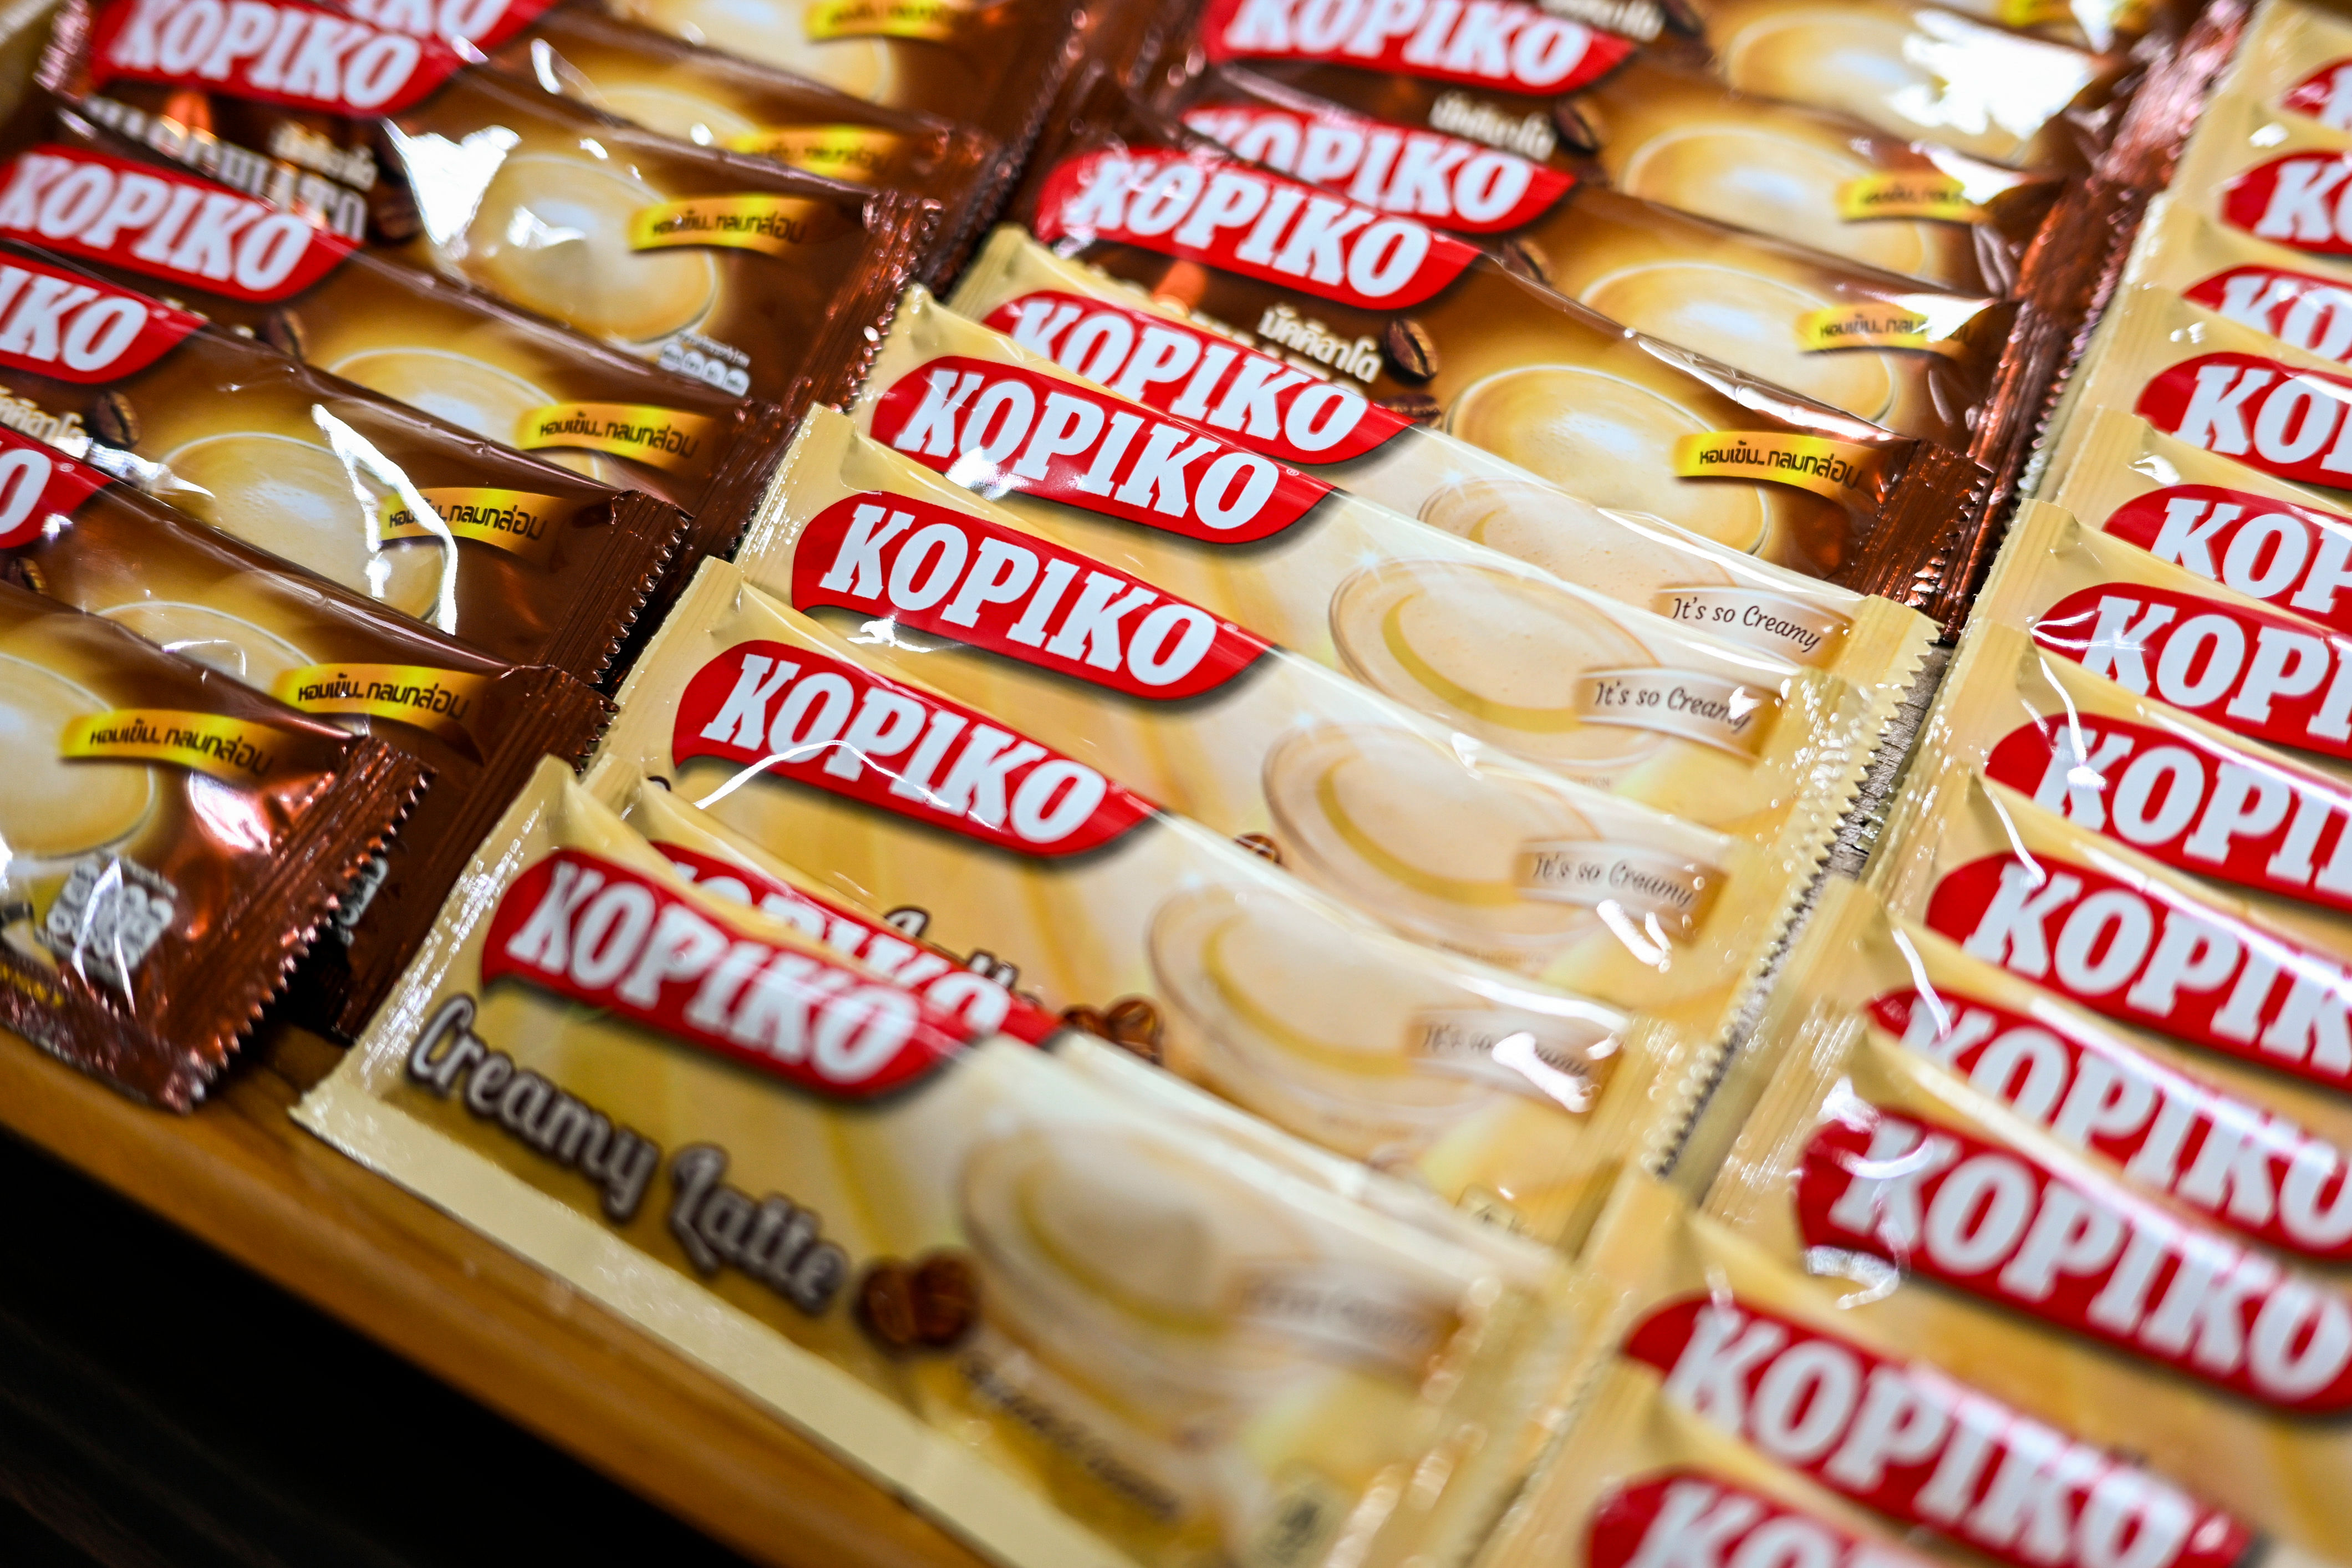 Kopiko maker Mayora enjoys sweet success amid newfound fame, Consumer &  Healthcare - THE BUSINESS TIMES